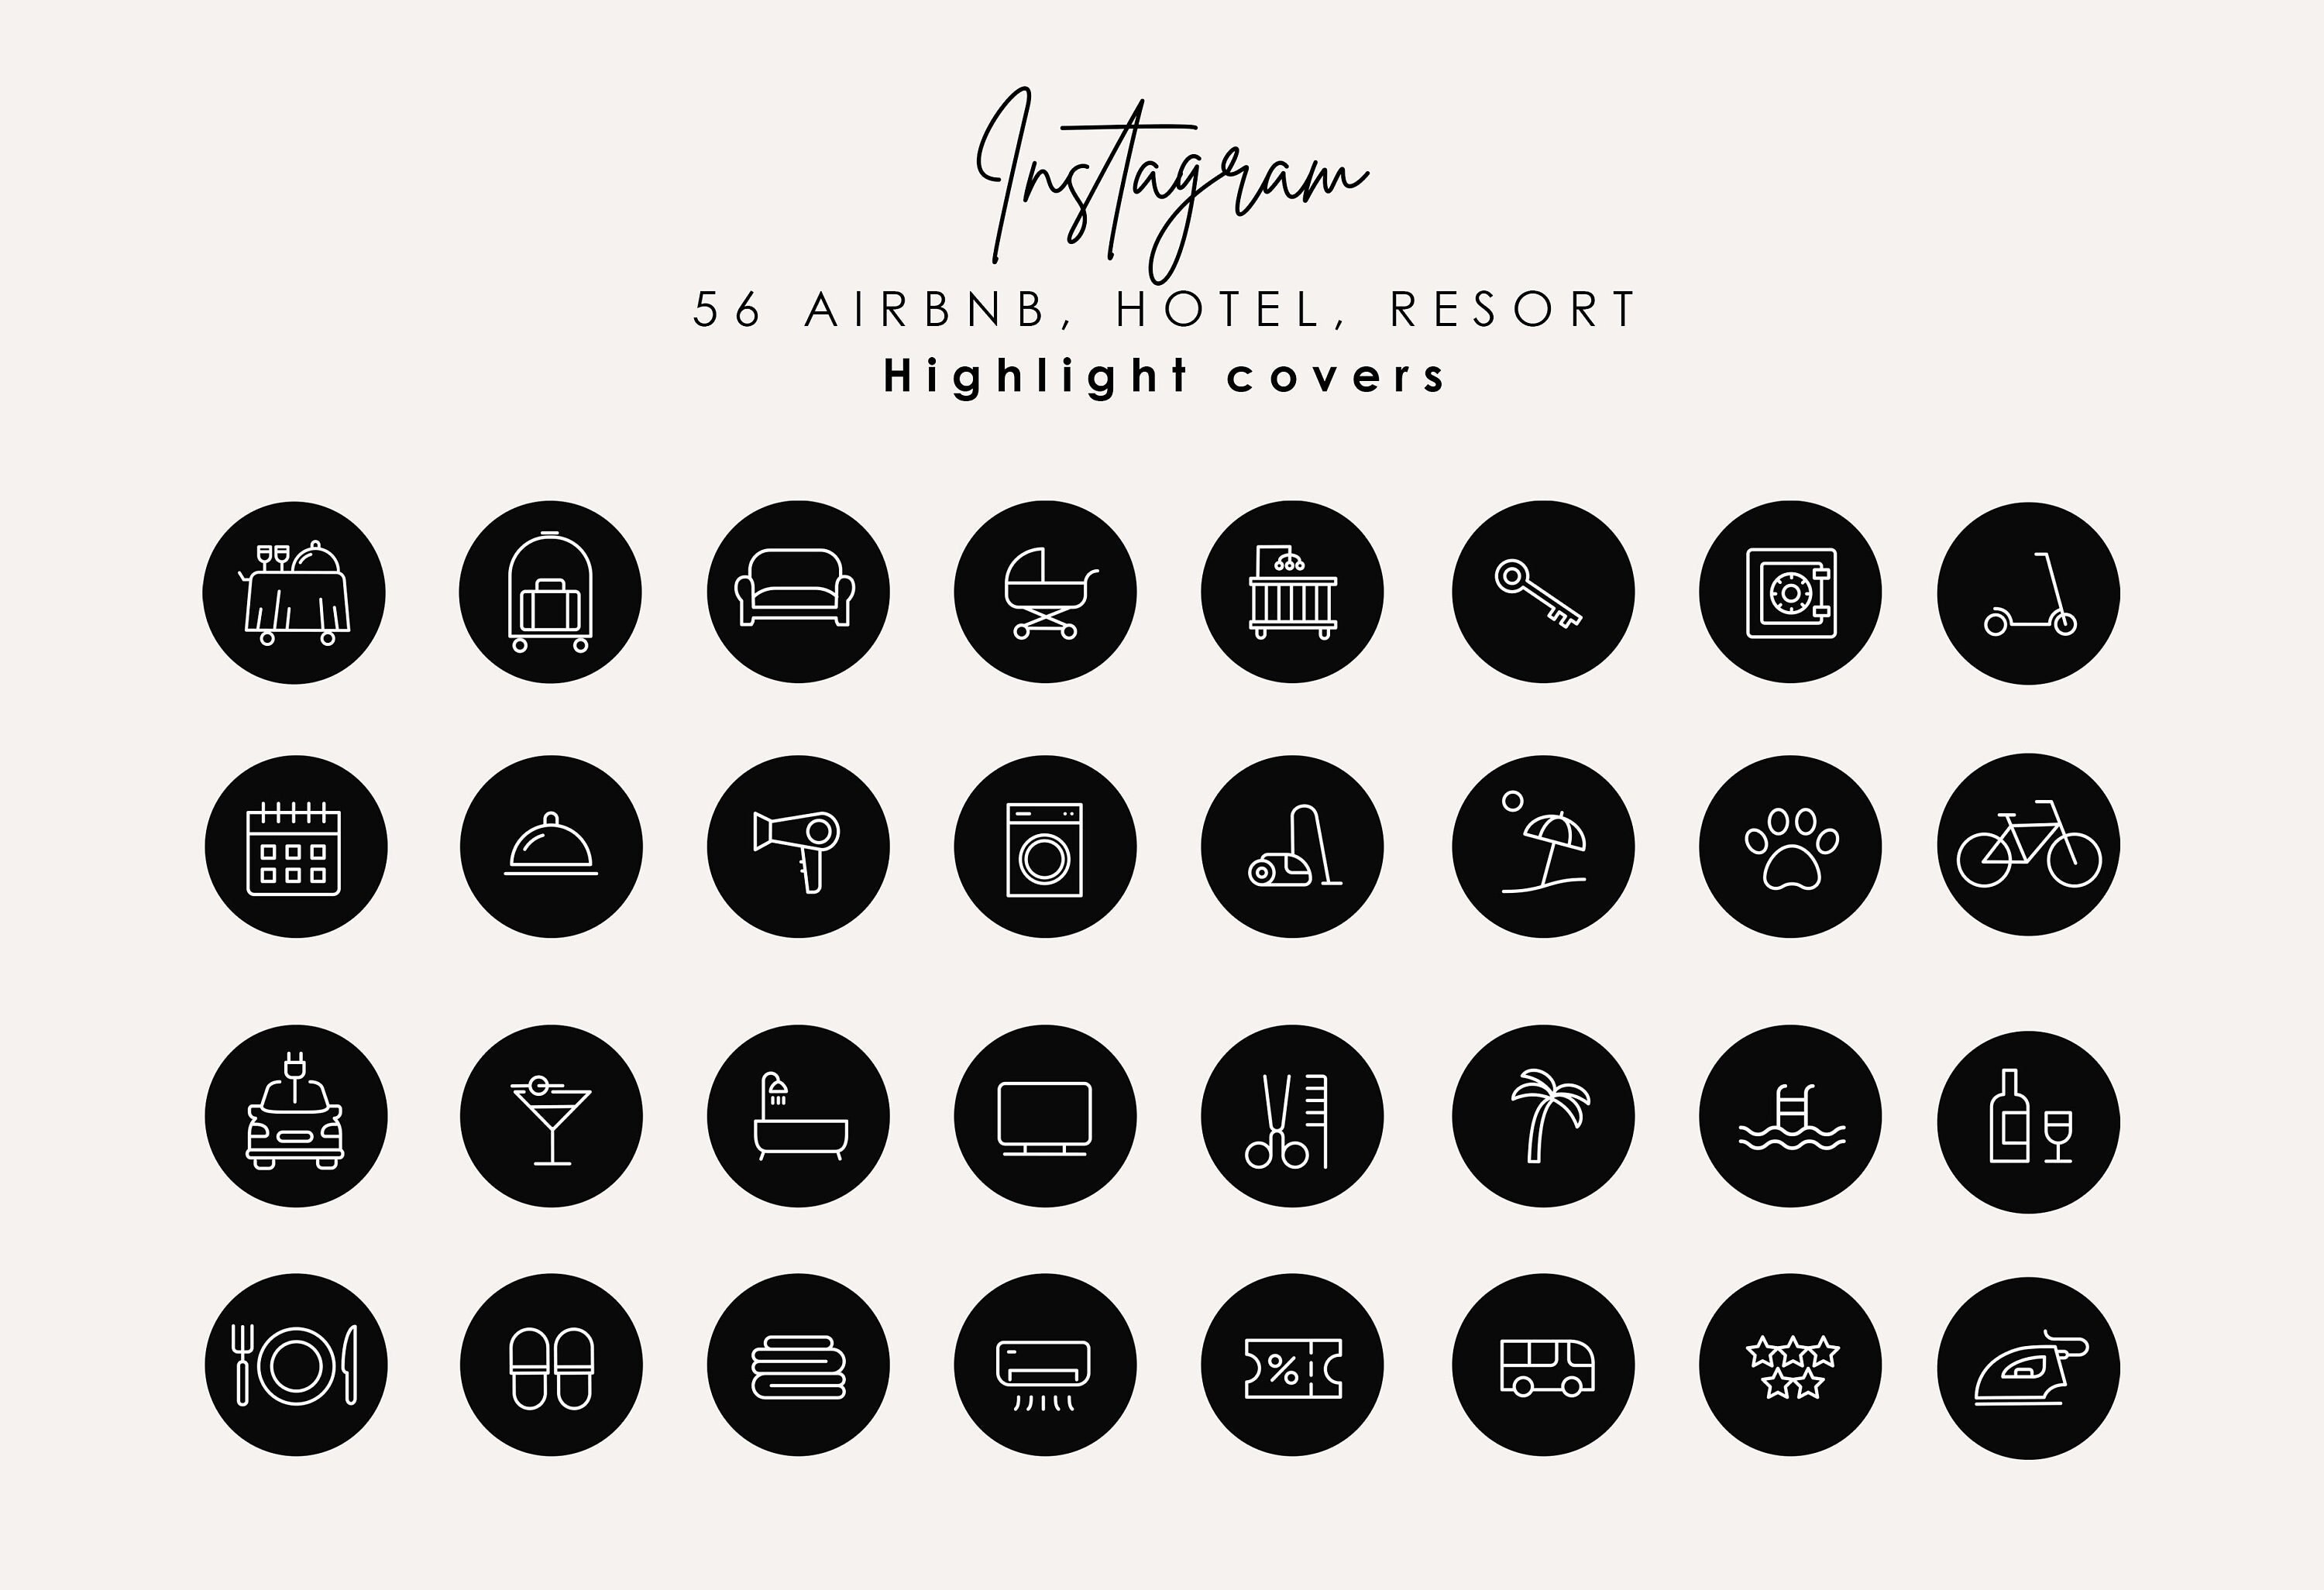 56 Instagram Airbnb Icons Hotel Highlight Cover Icons - Etsy